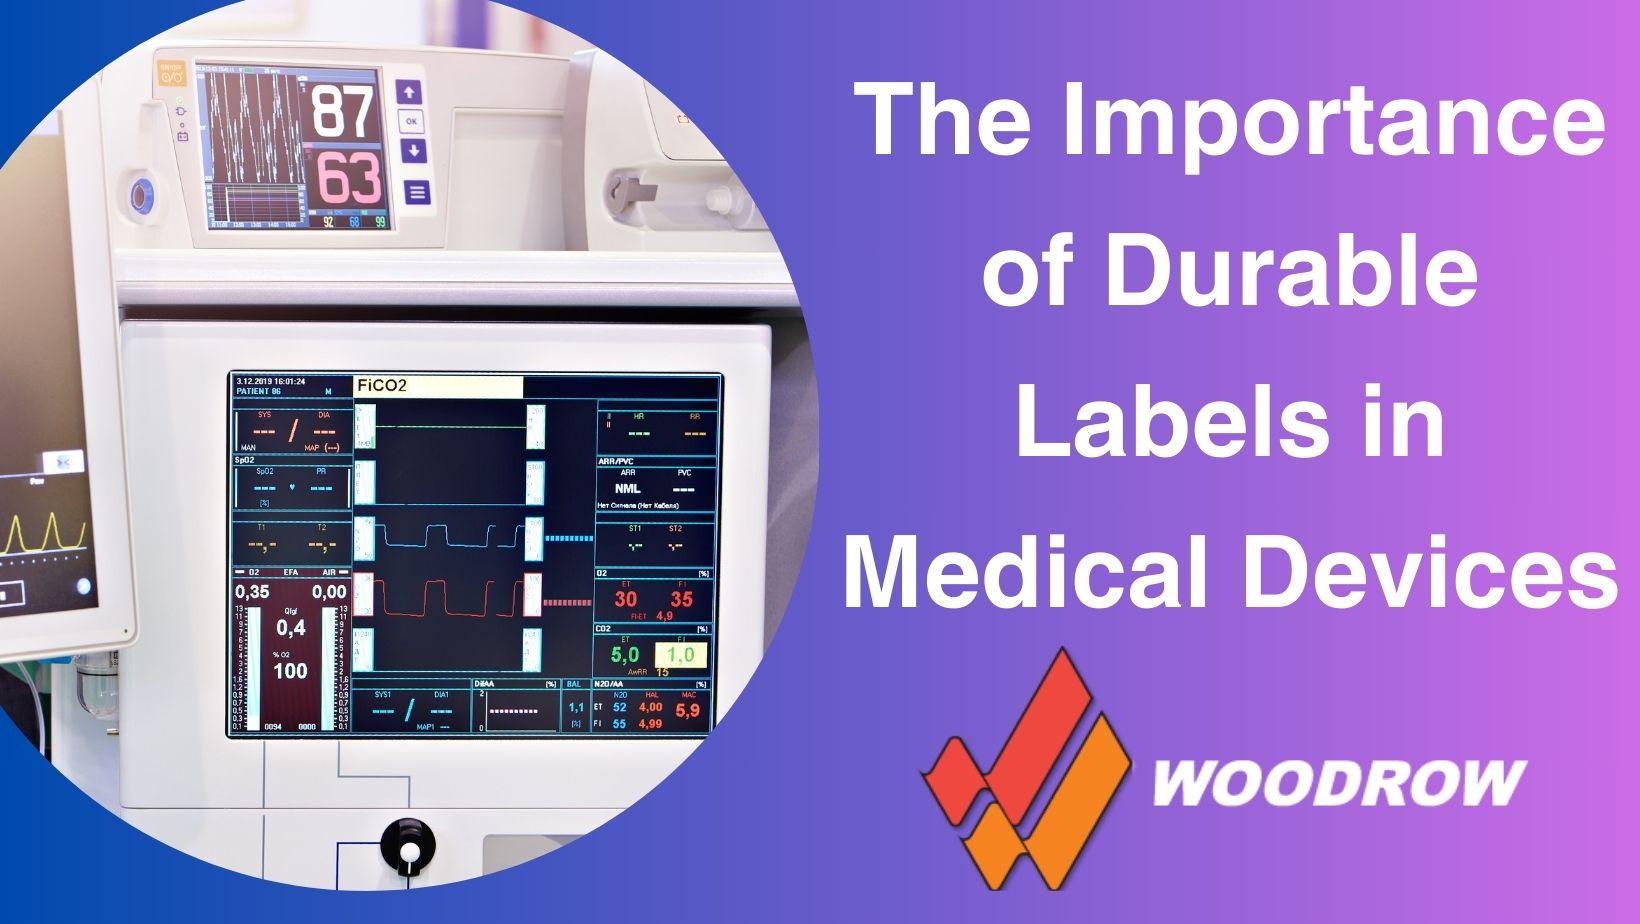 The Importance of Durable Labels in Medical Devices